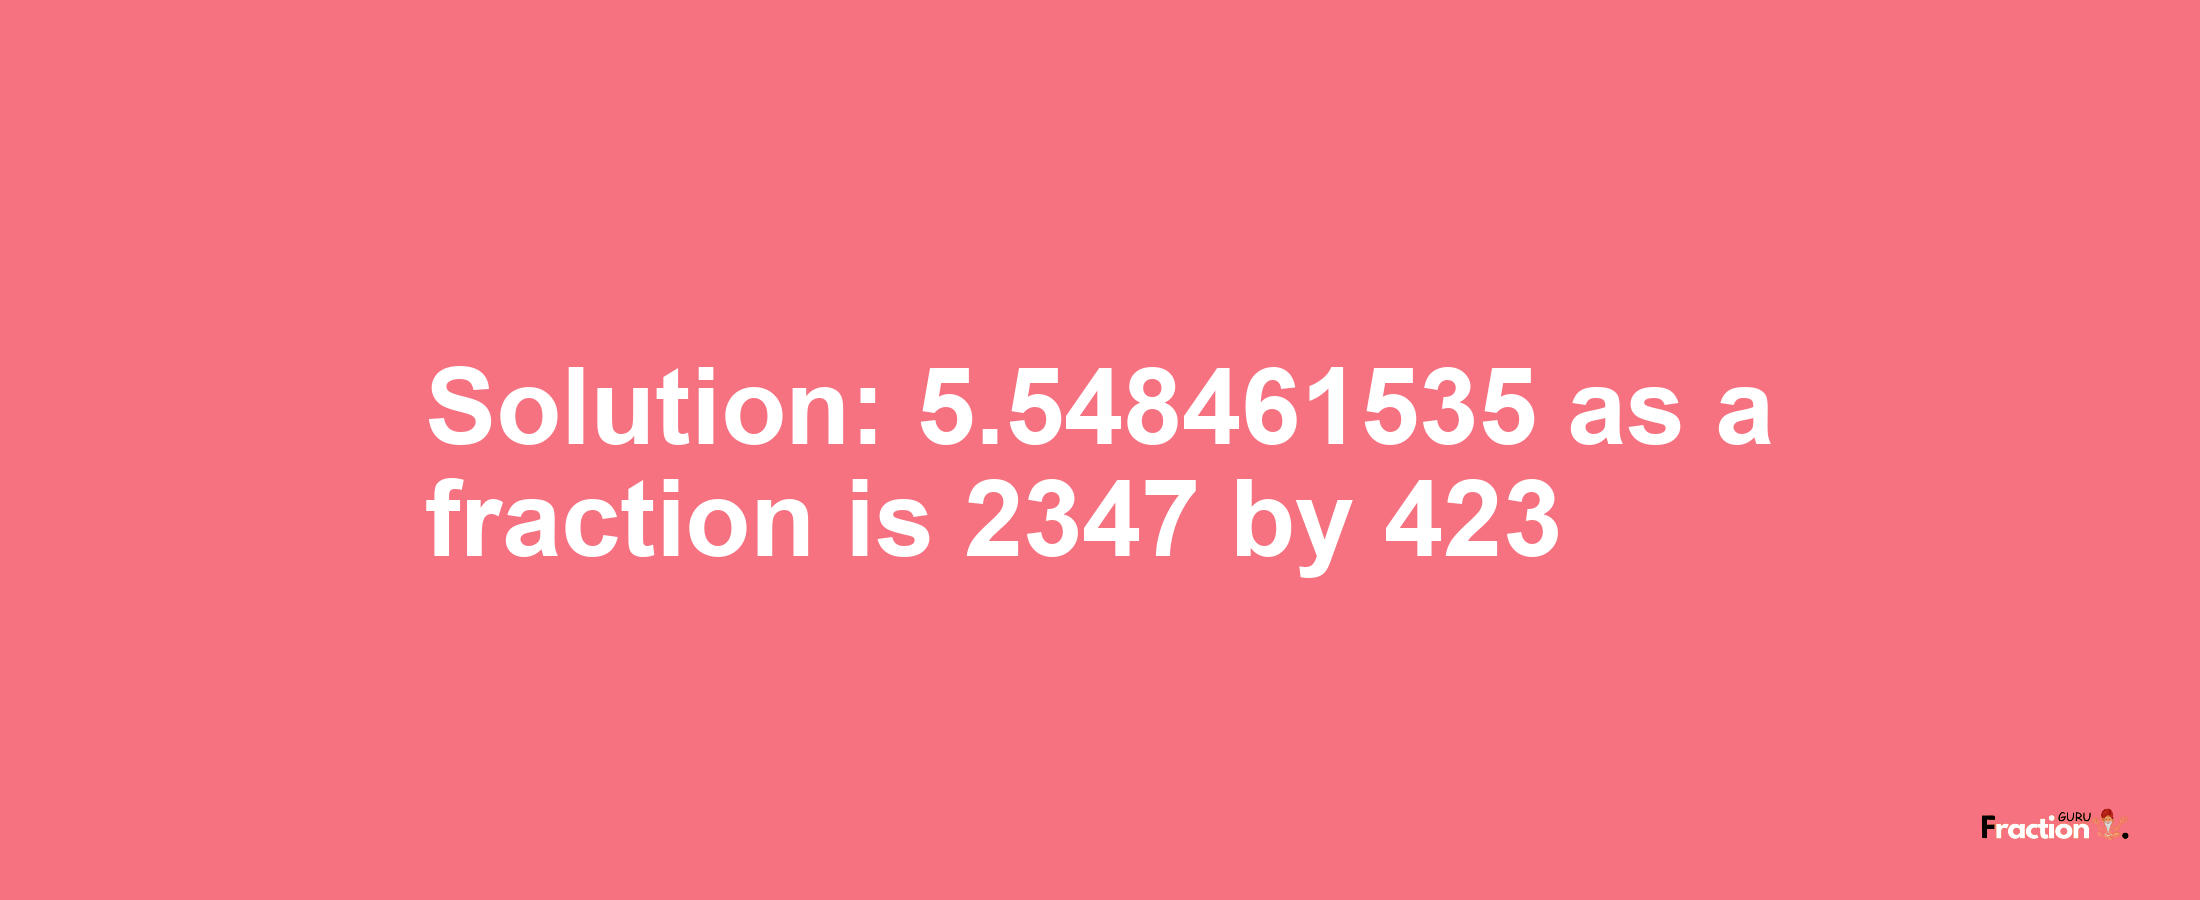 Solution:5.548461535 as a fraction is 2347/423